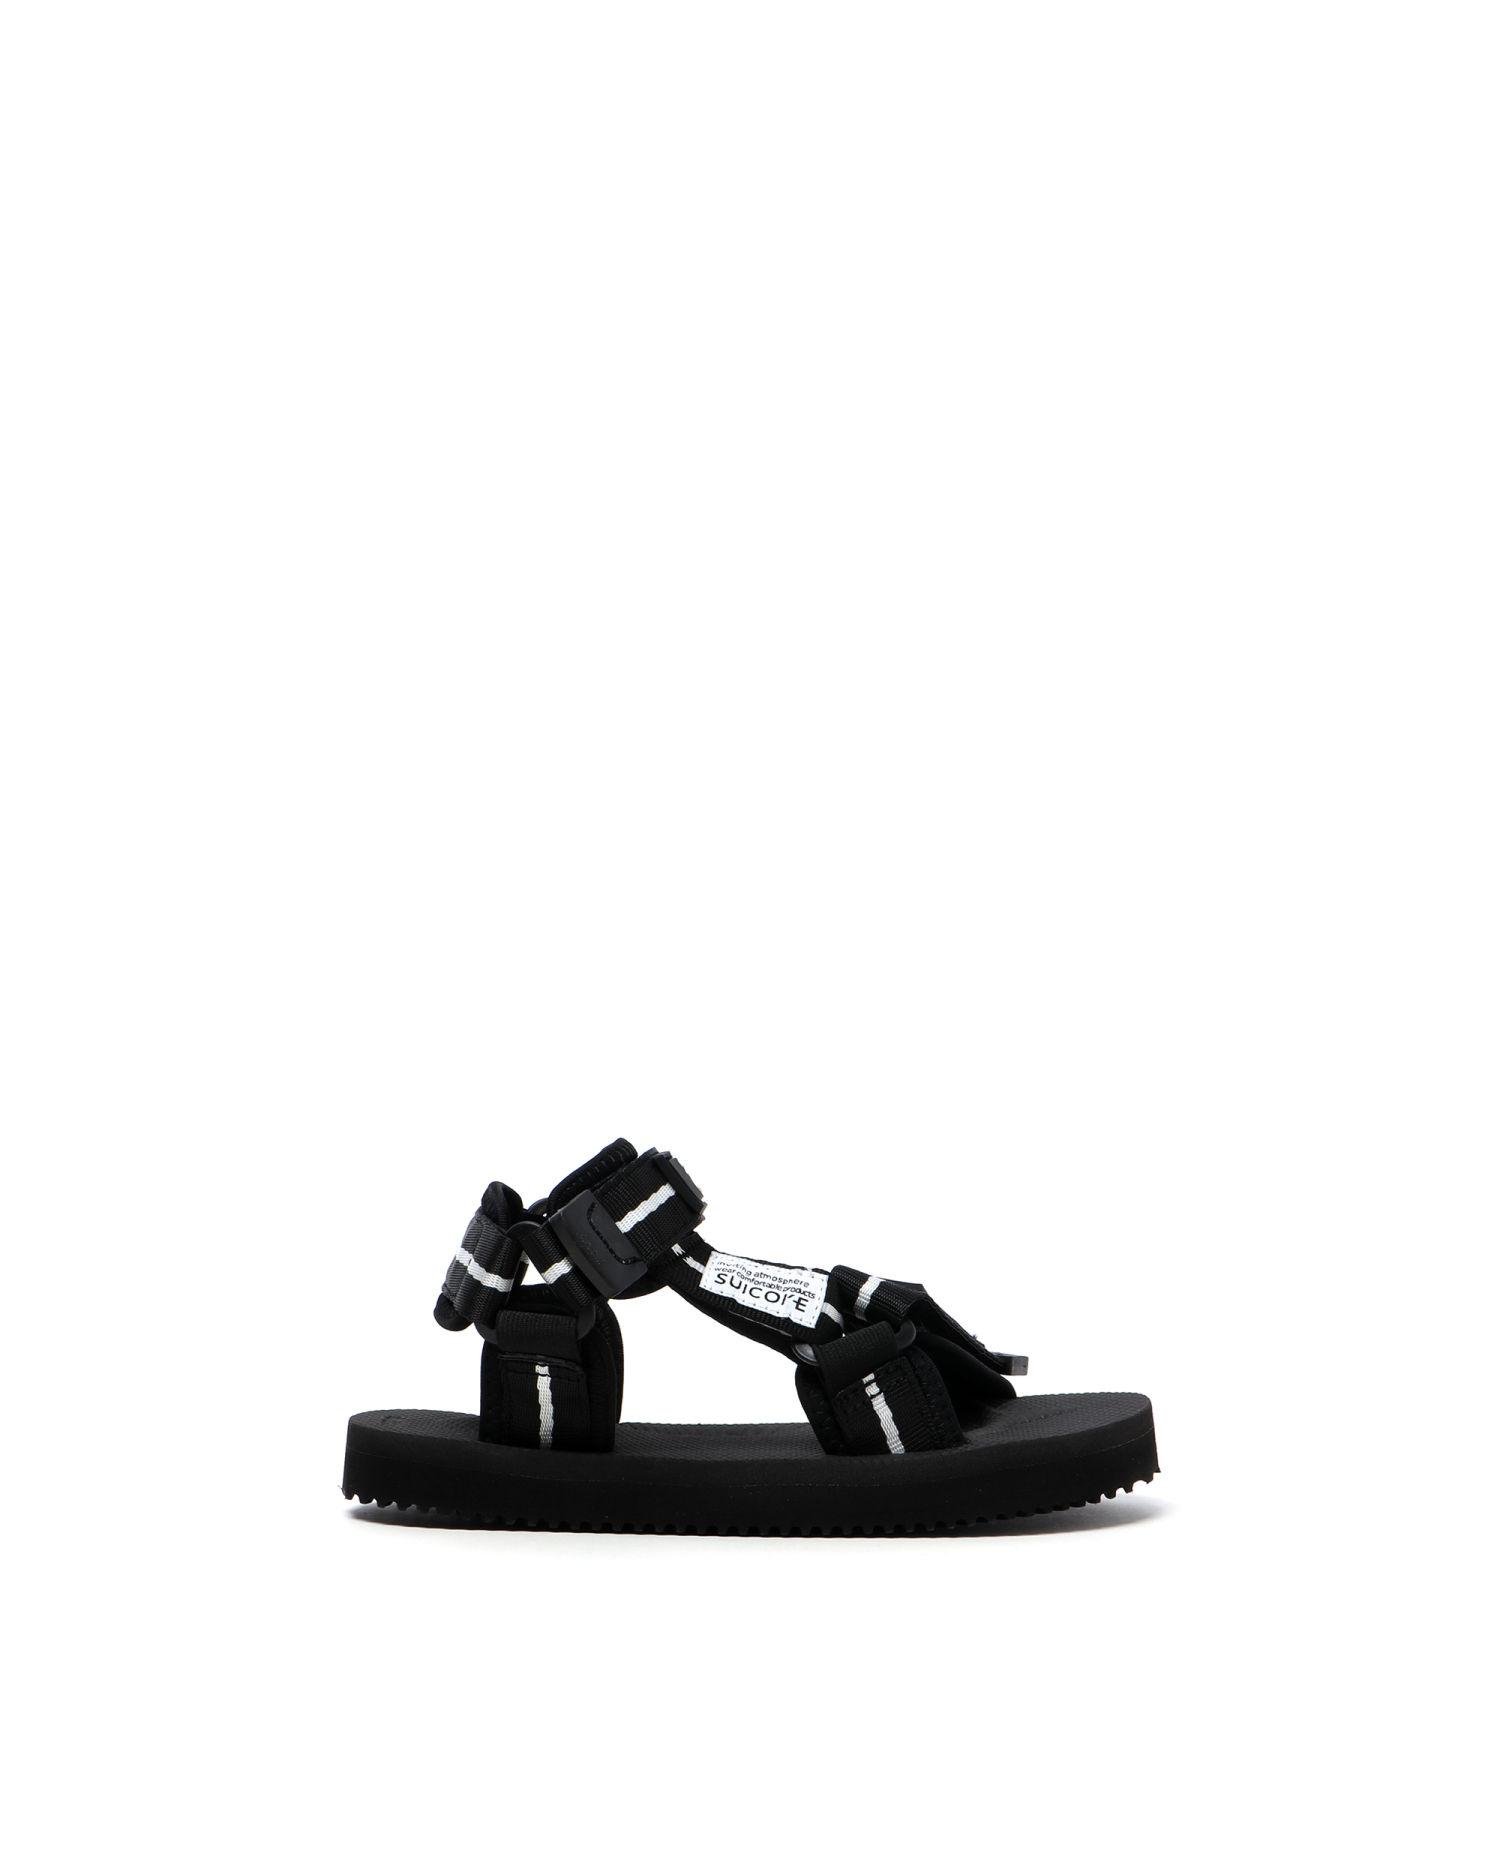 Kids logo sandals by PALM ANGELS